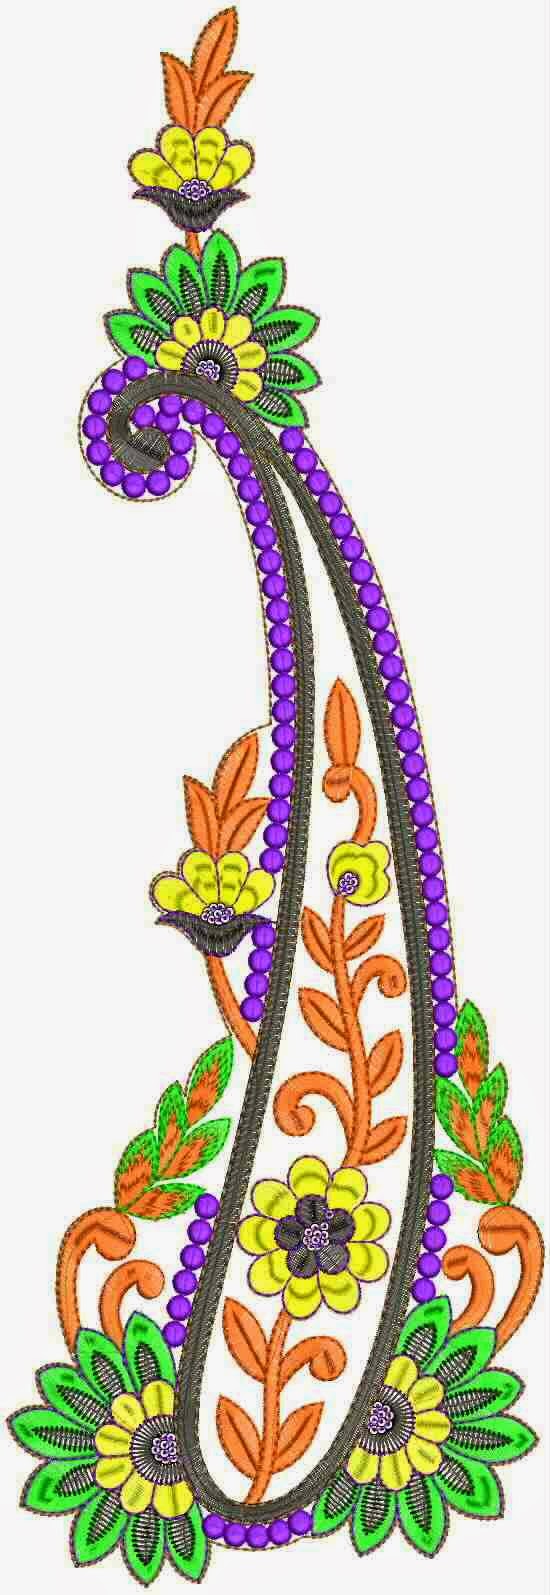 Embdesigntube: Spring Cording Embroidery Patch Designs